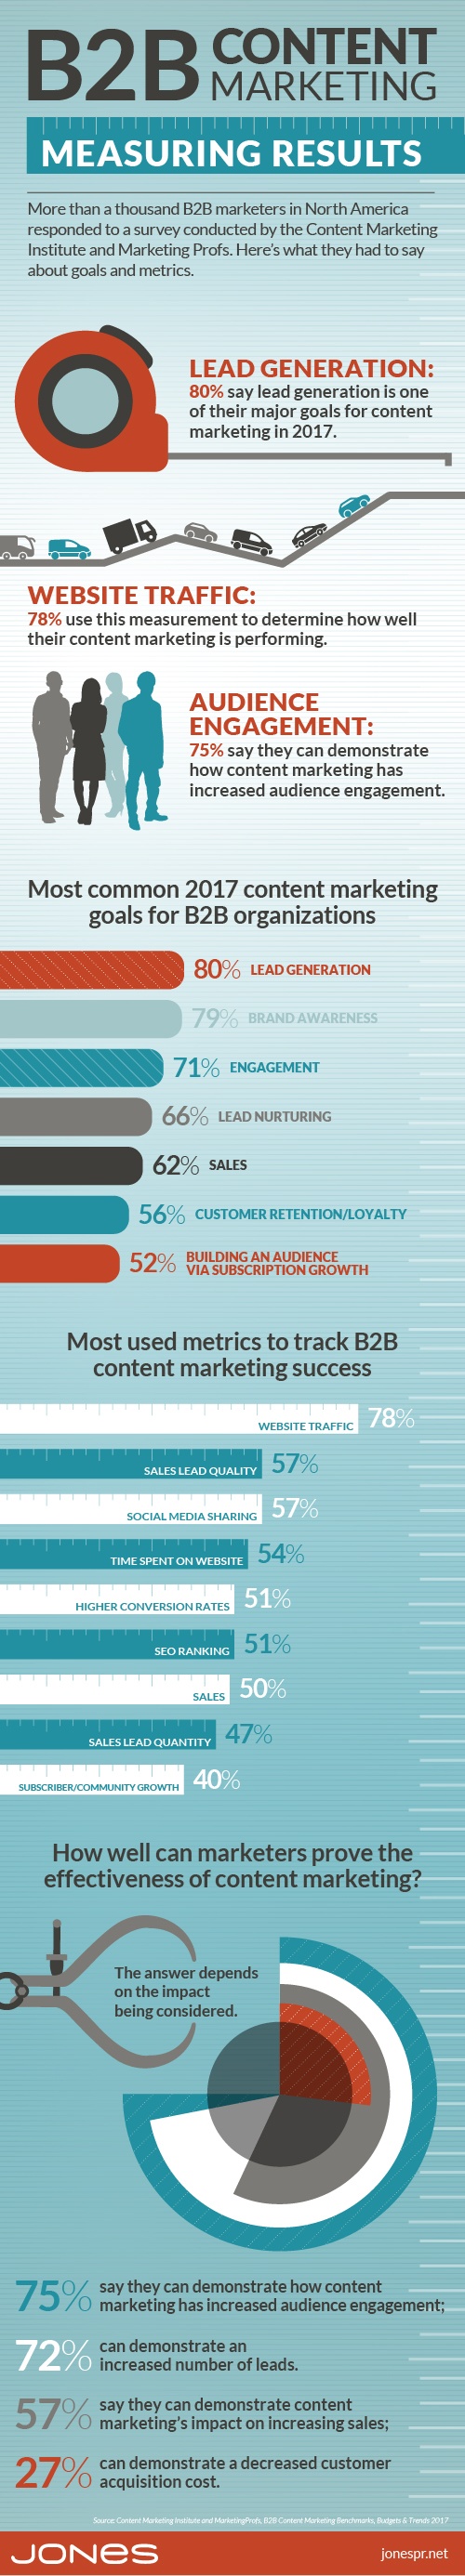 Are You Measuring Your Content Marketing Results? (Infographic)